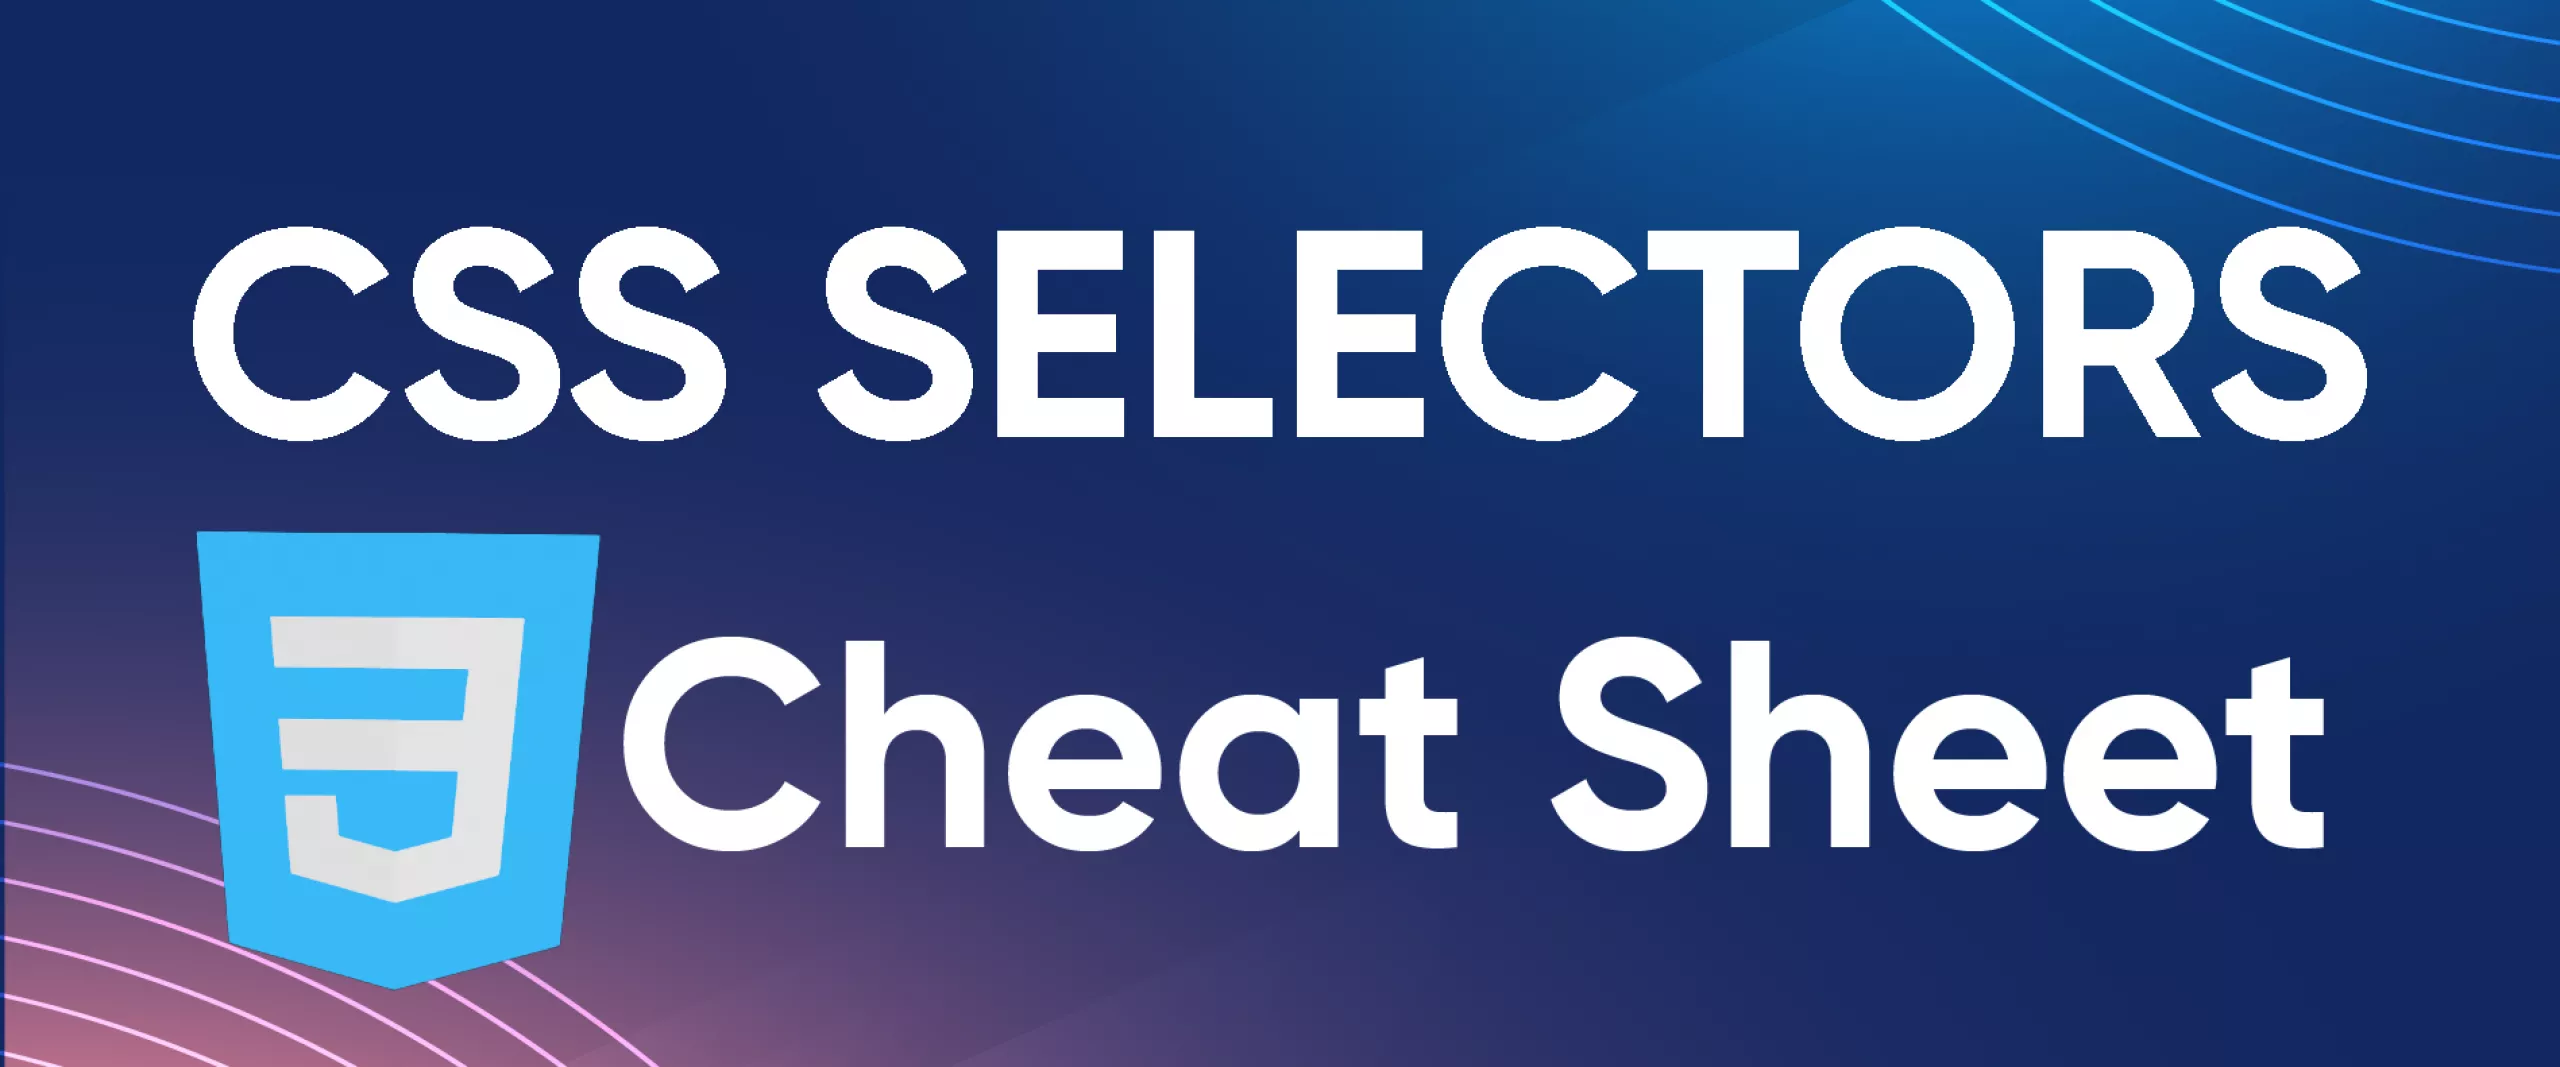 The Ultimate CSS Selectors Cheat Sheet for Web Scraping